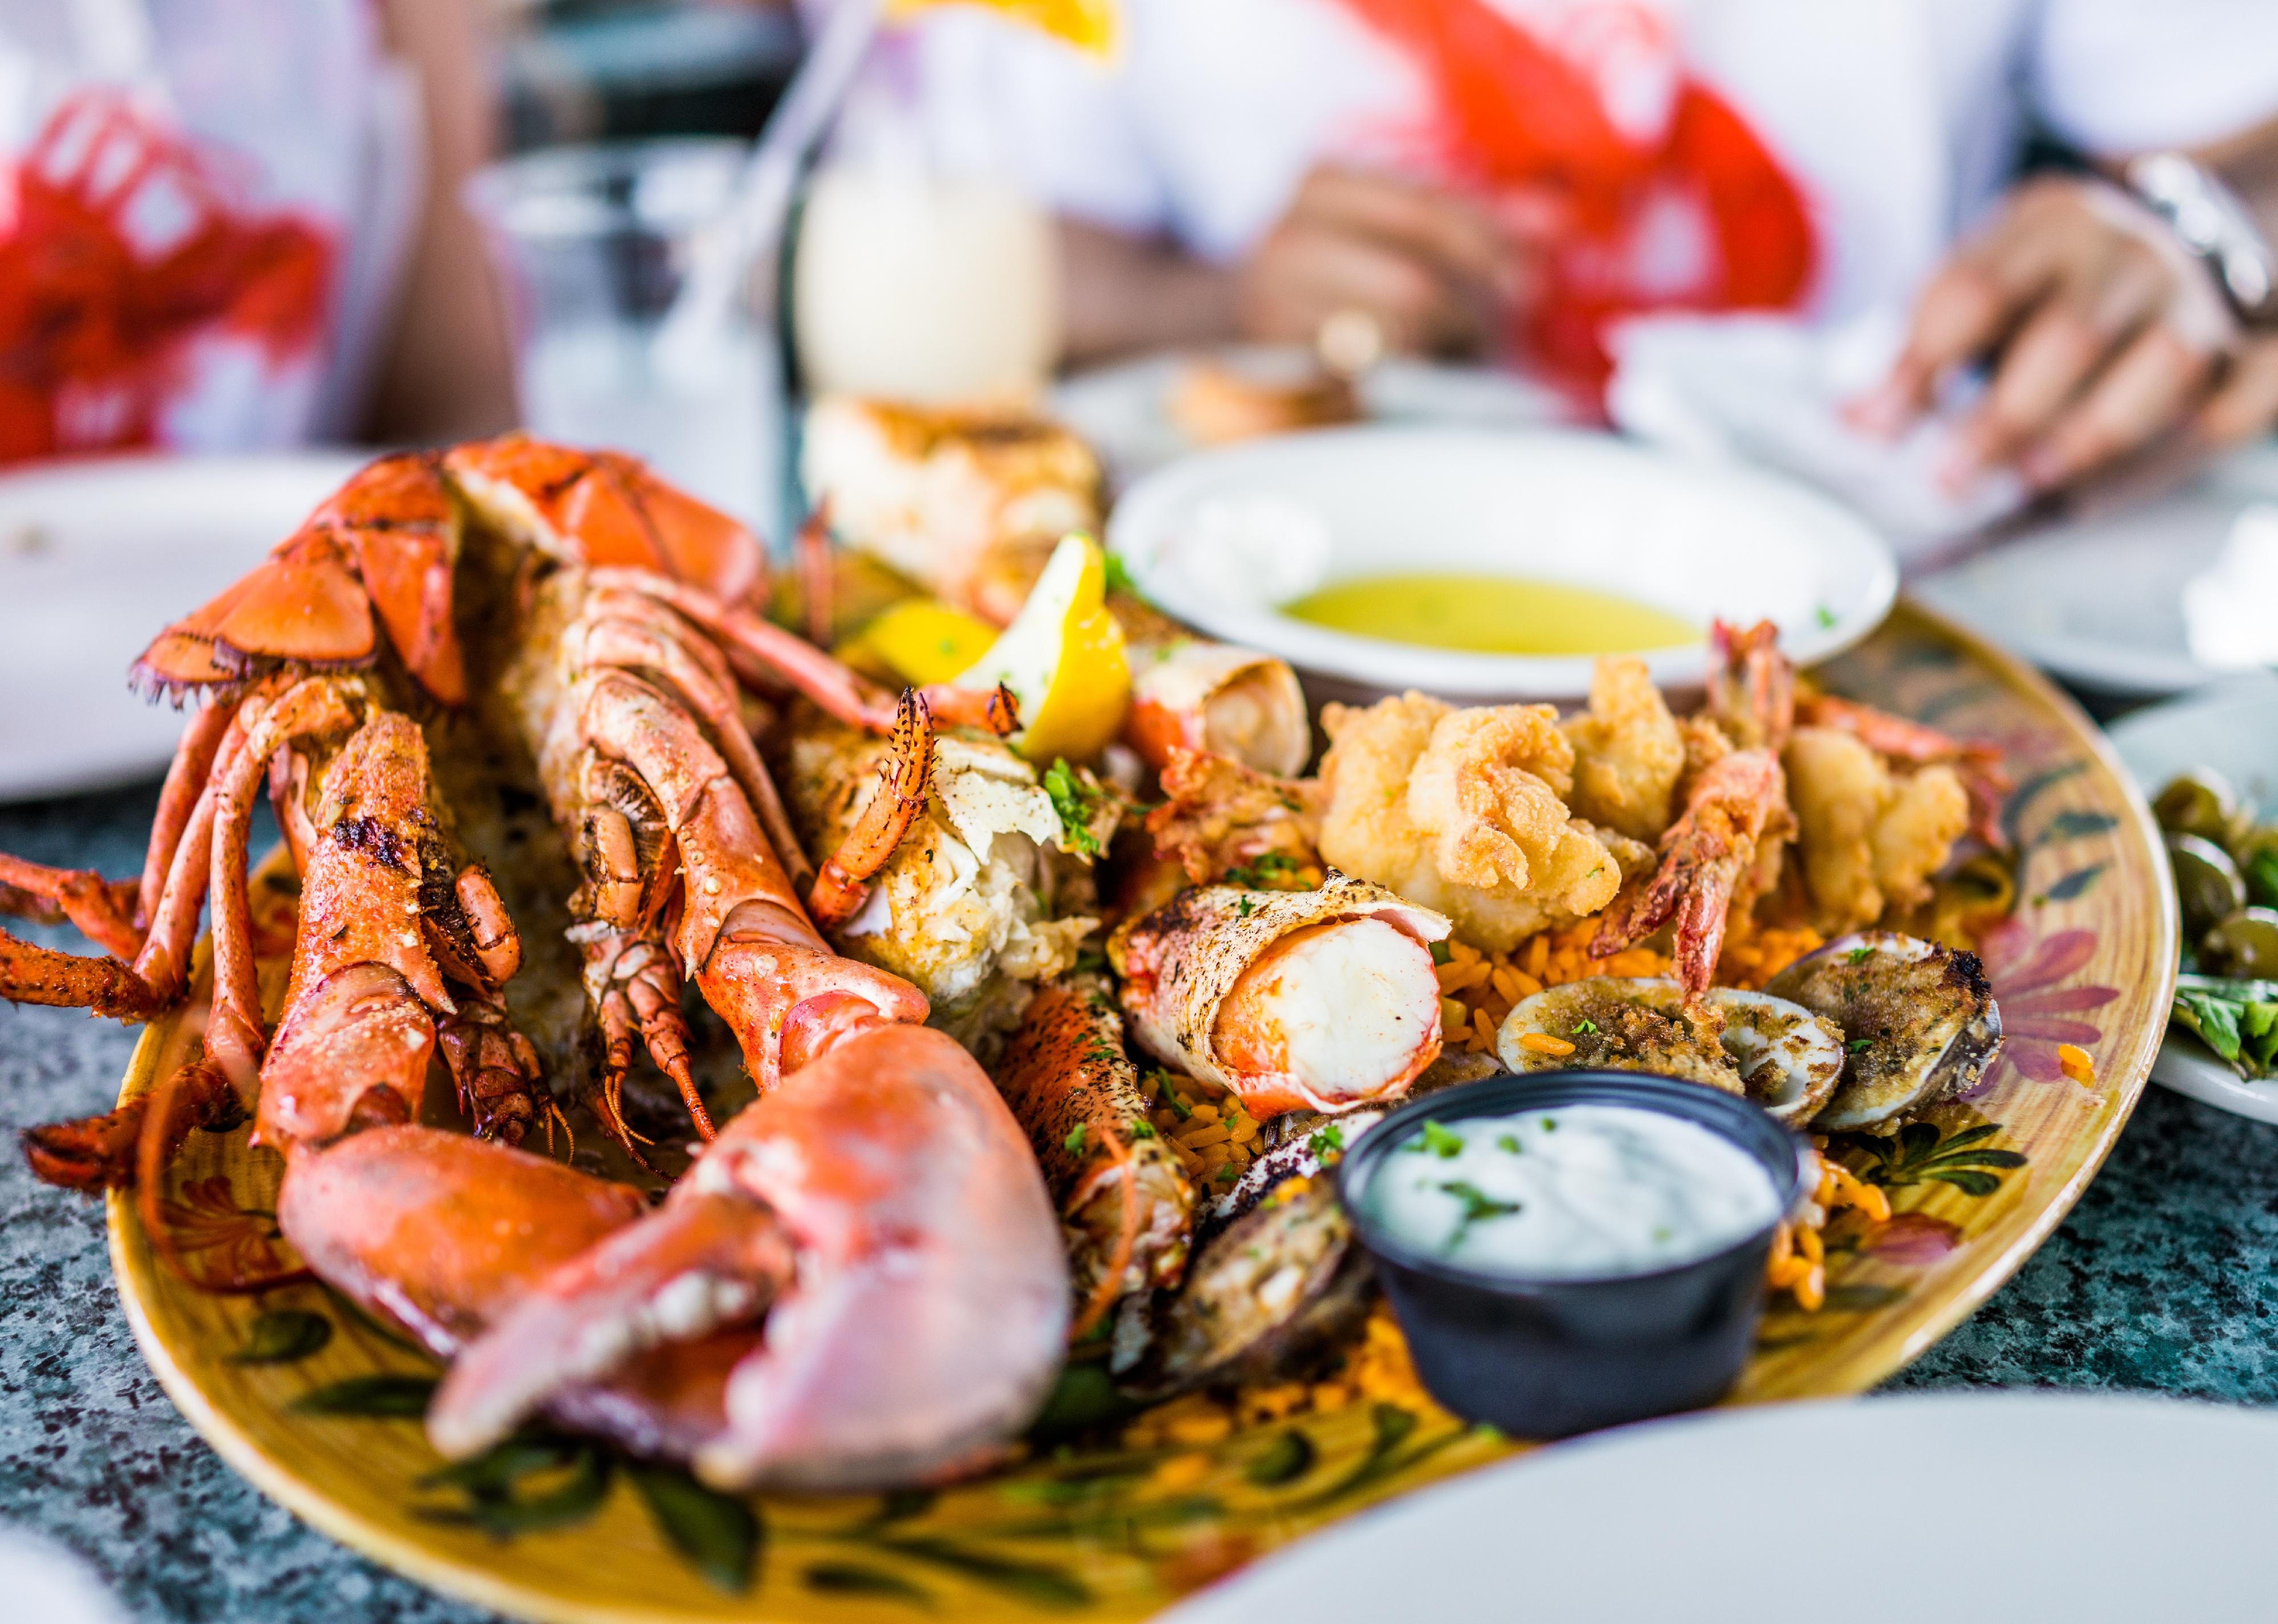 Highestrated Seafood Restaurants in Baton Rouge, According to